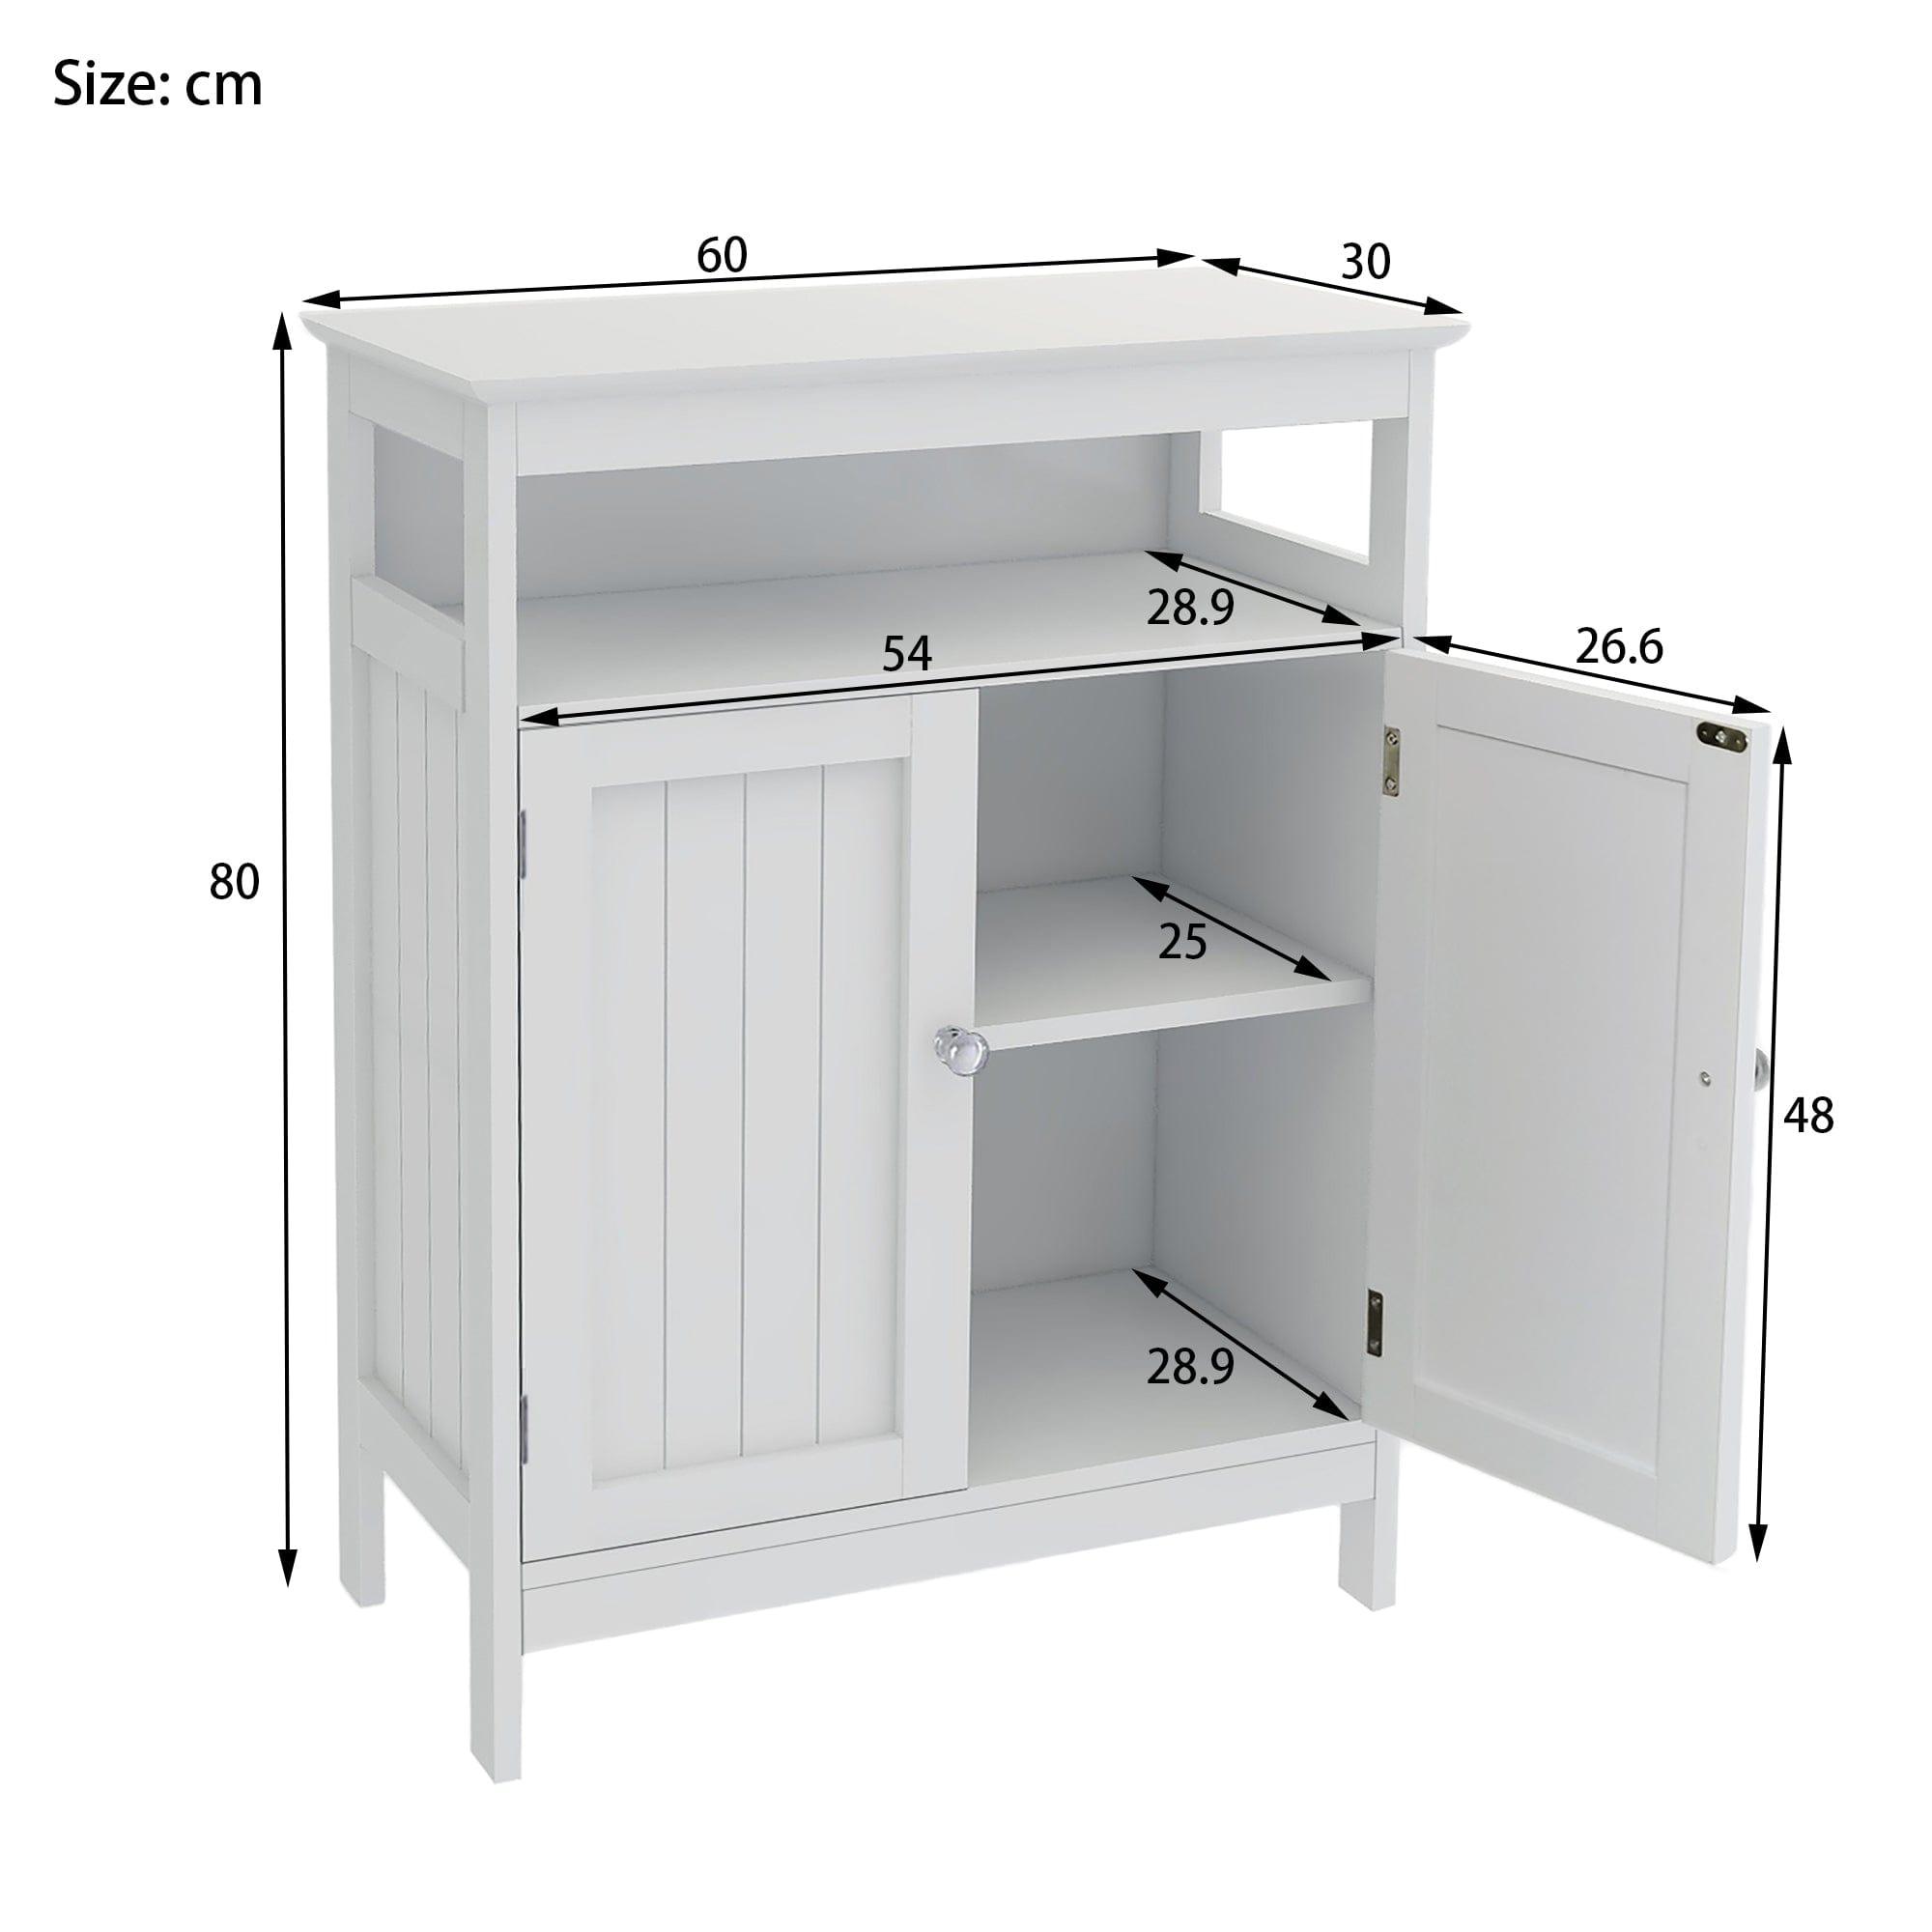 Shop Bathroom standing storage with double shutter doors cabinet-White Mademoiselle Home Decor